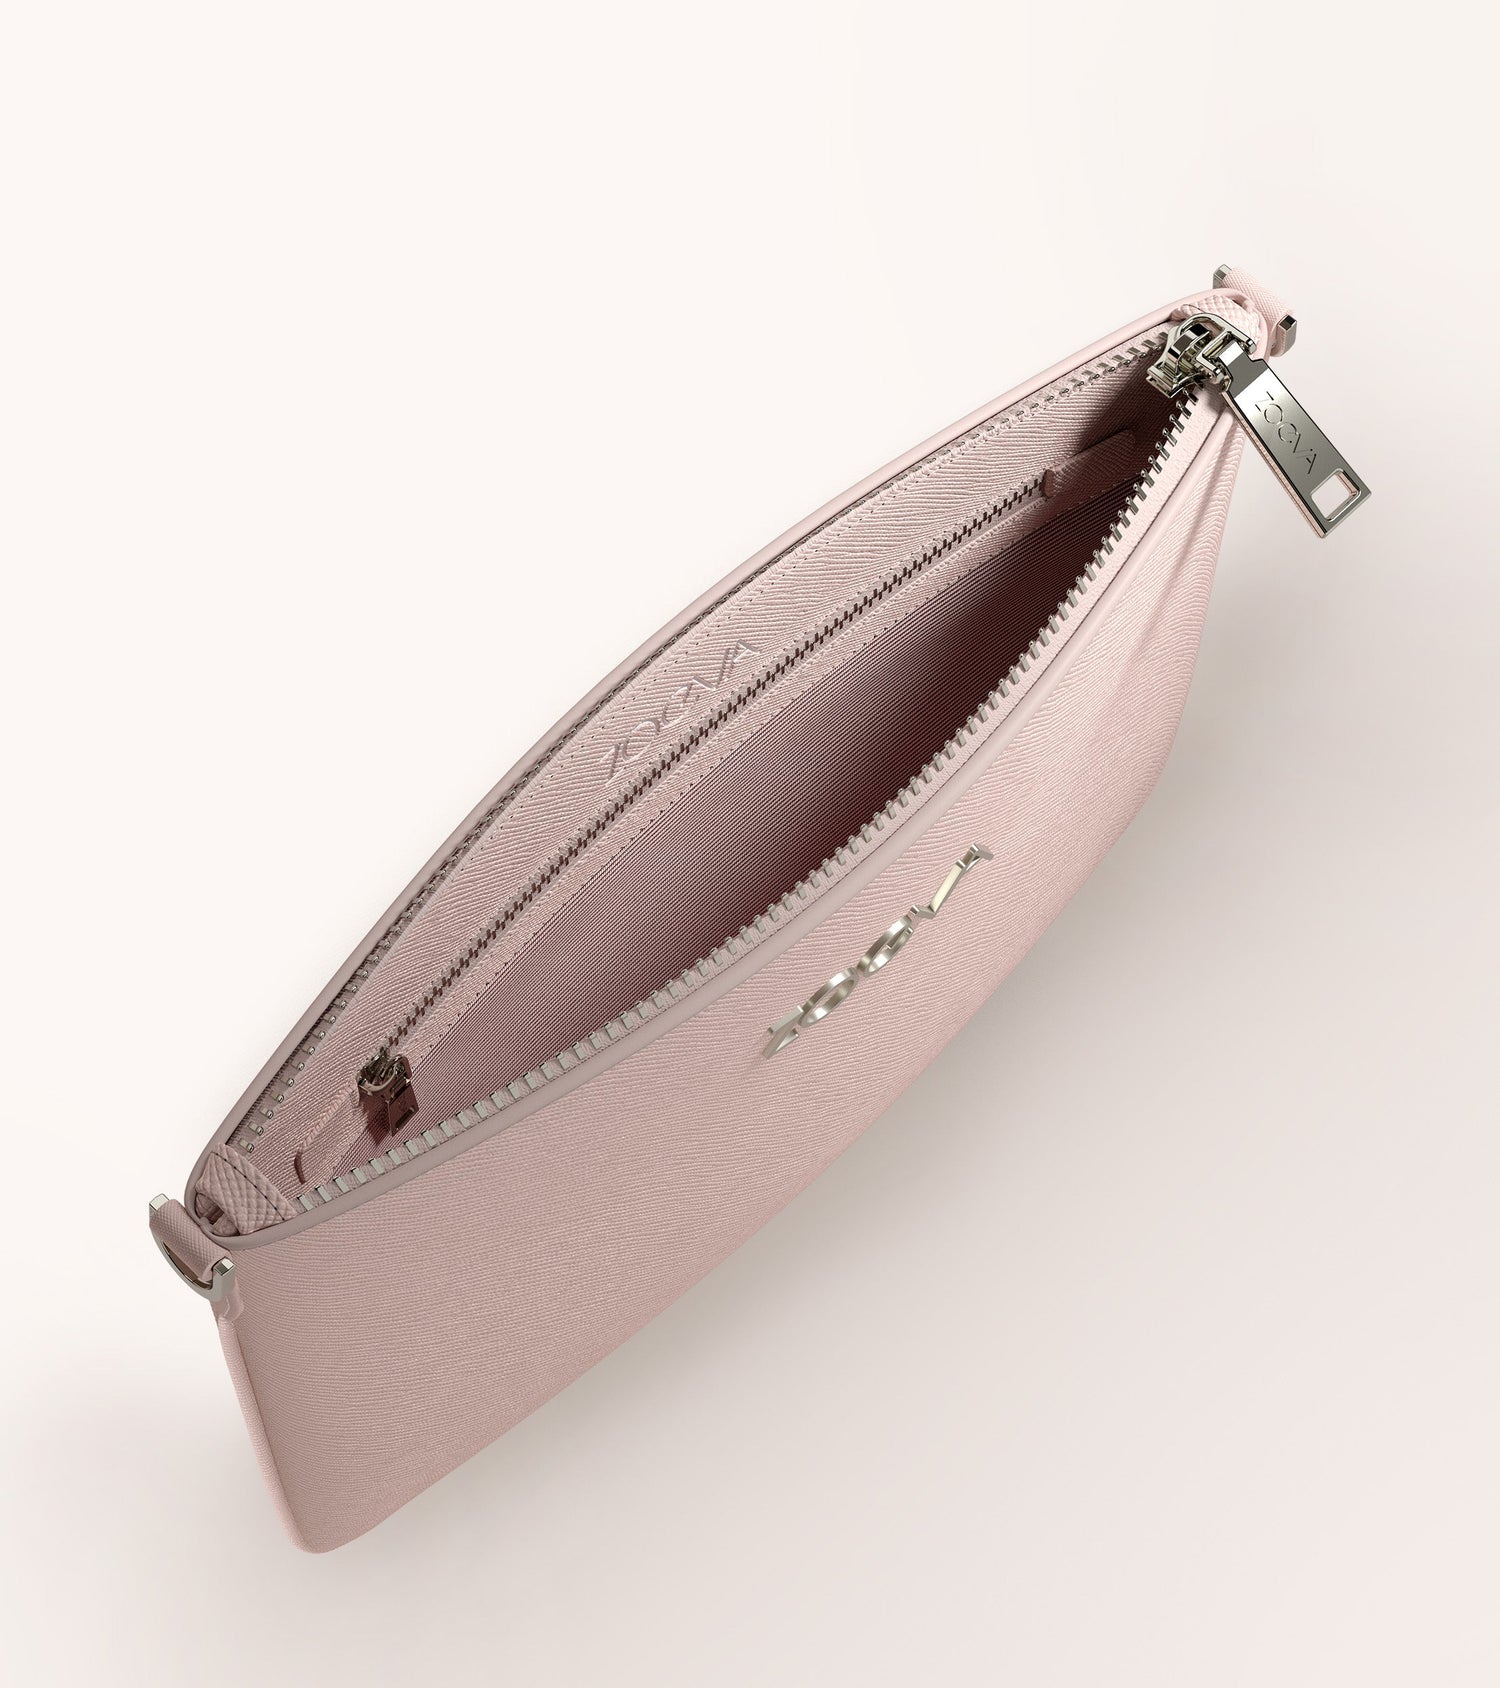 The Everyday Clutch (Dusty Rose) Main Image featured